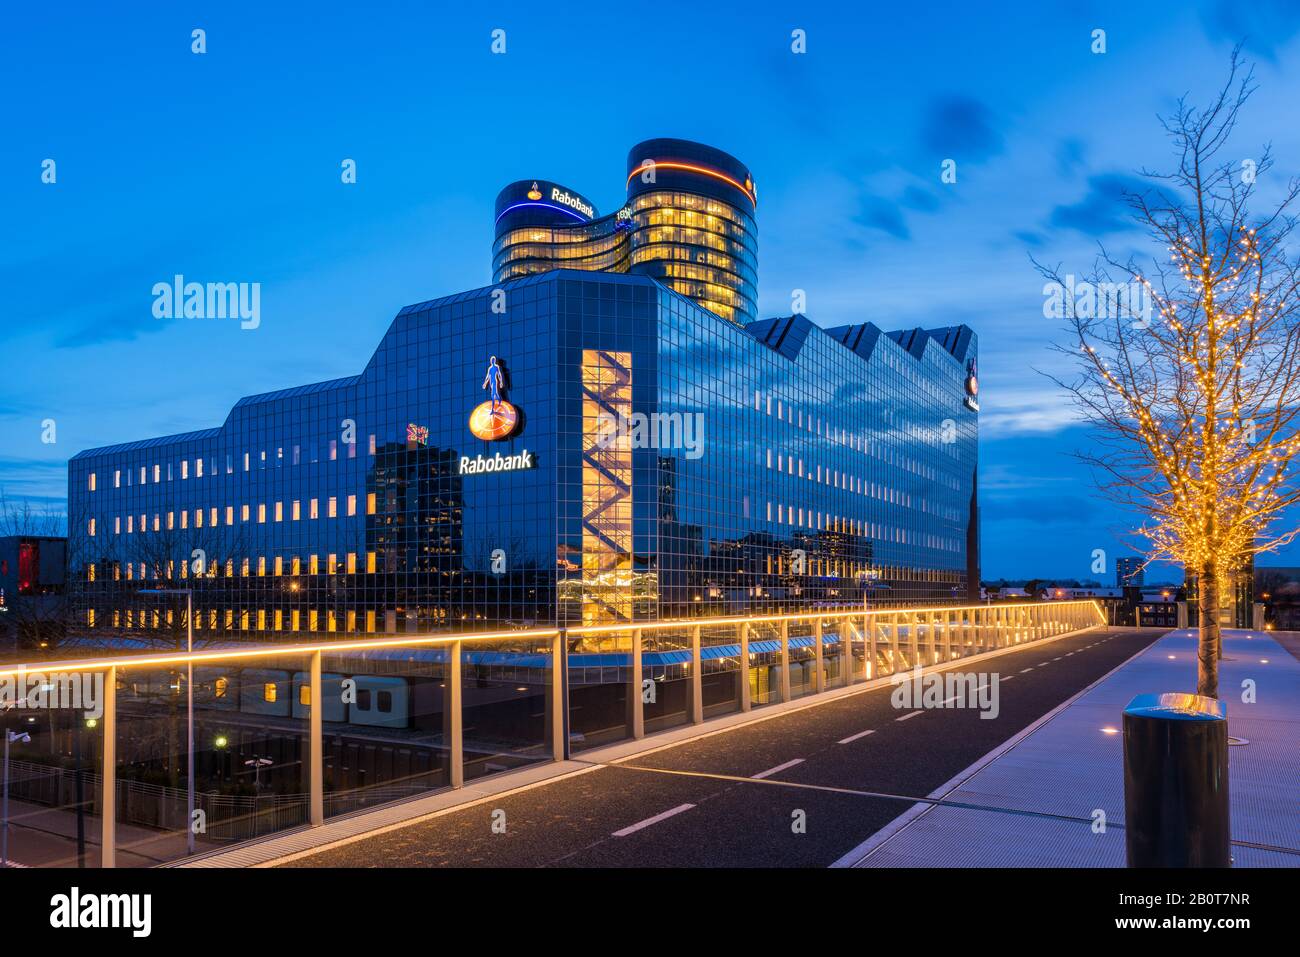 Rabobank World Headquarters in Utrecht, Netherlands. Rabobank is  a Dutch multinational banking and financial services company. Stock Photo